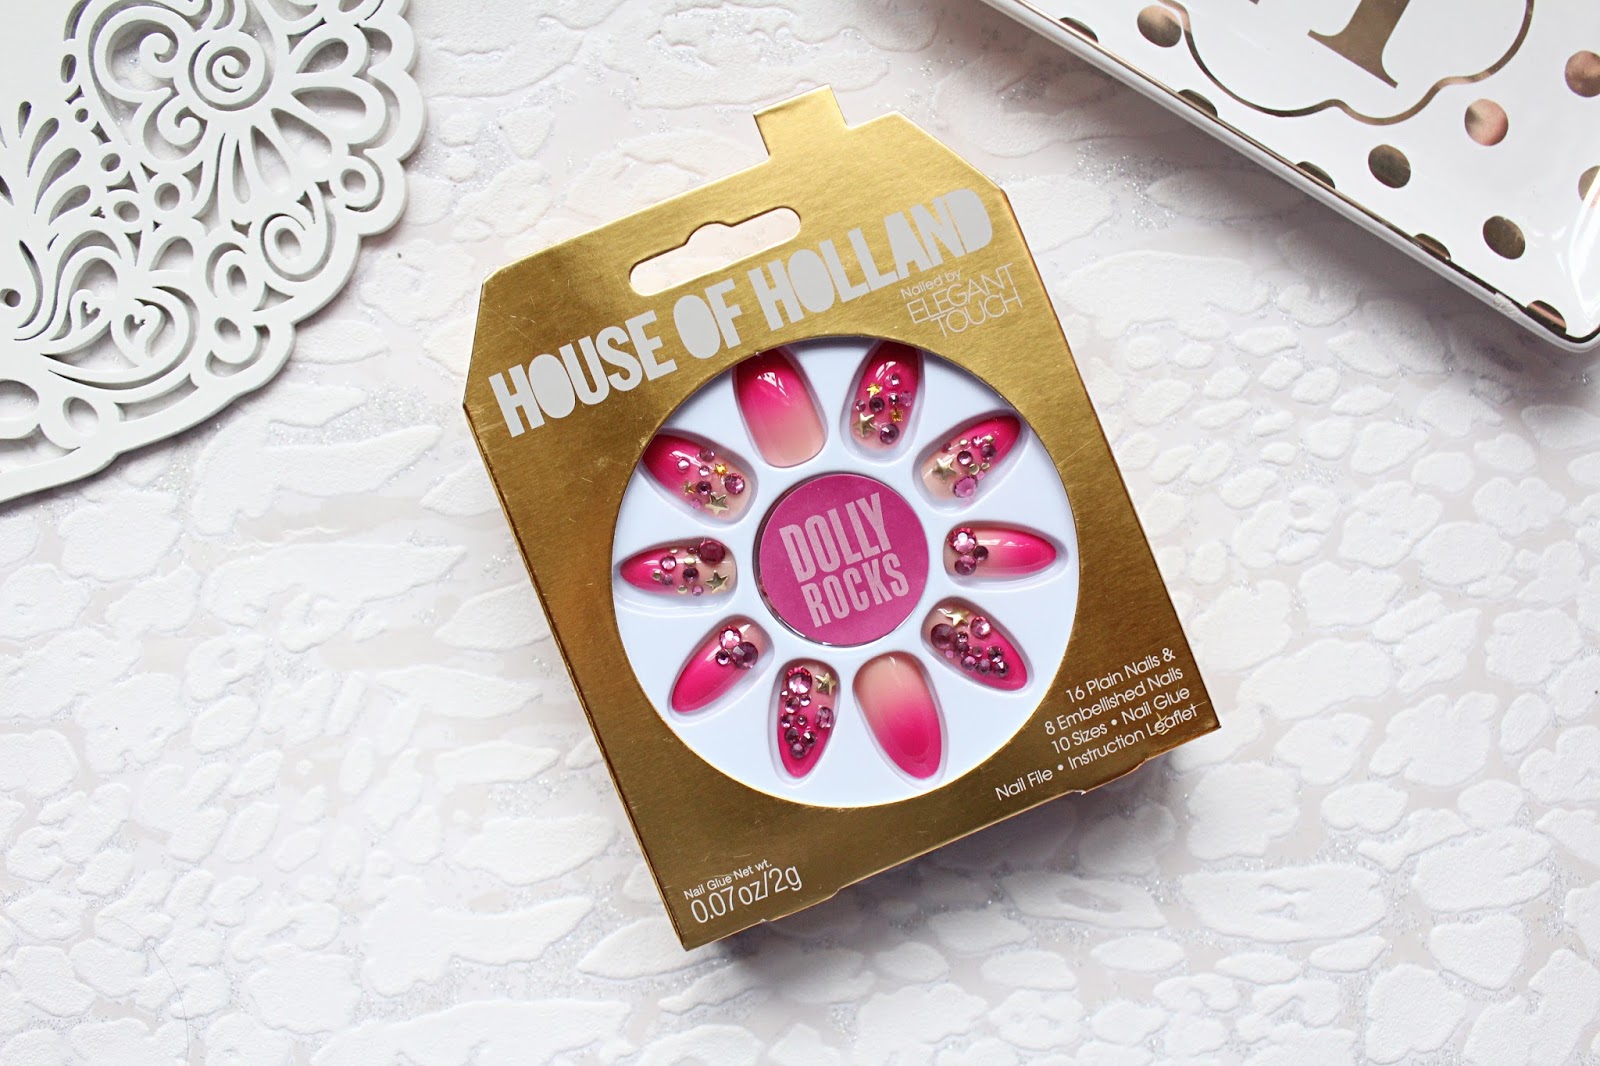 Elegant Touch x House of Holland Dolly Rocks Luxe Nails